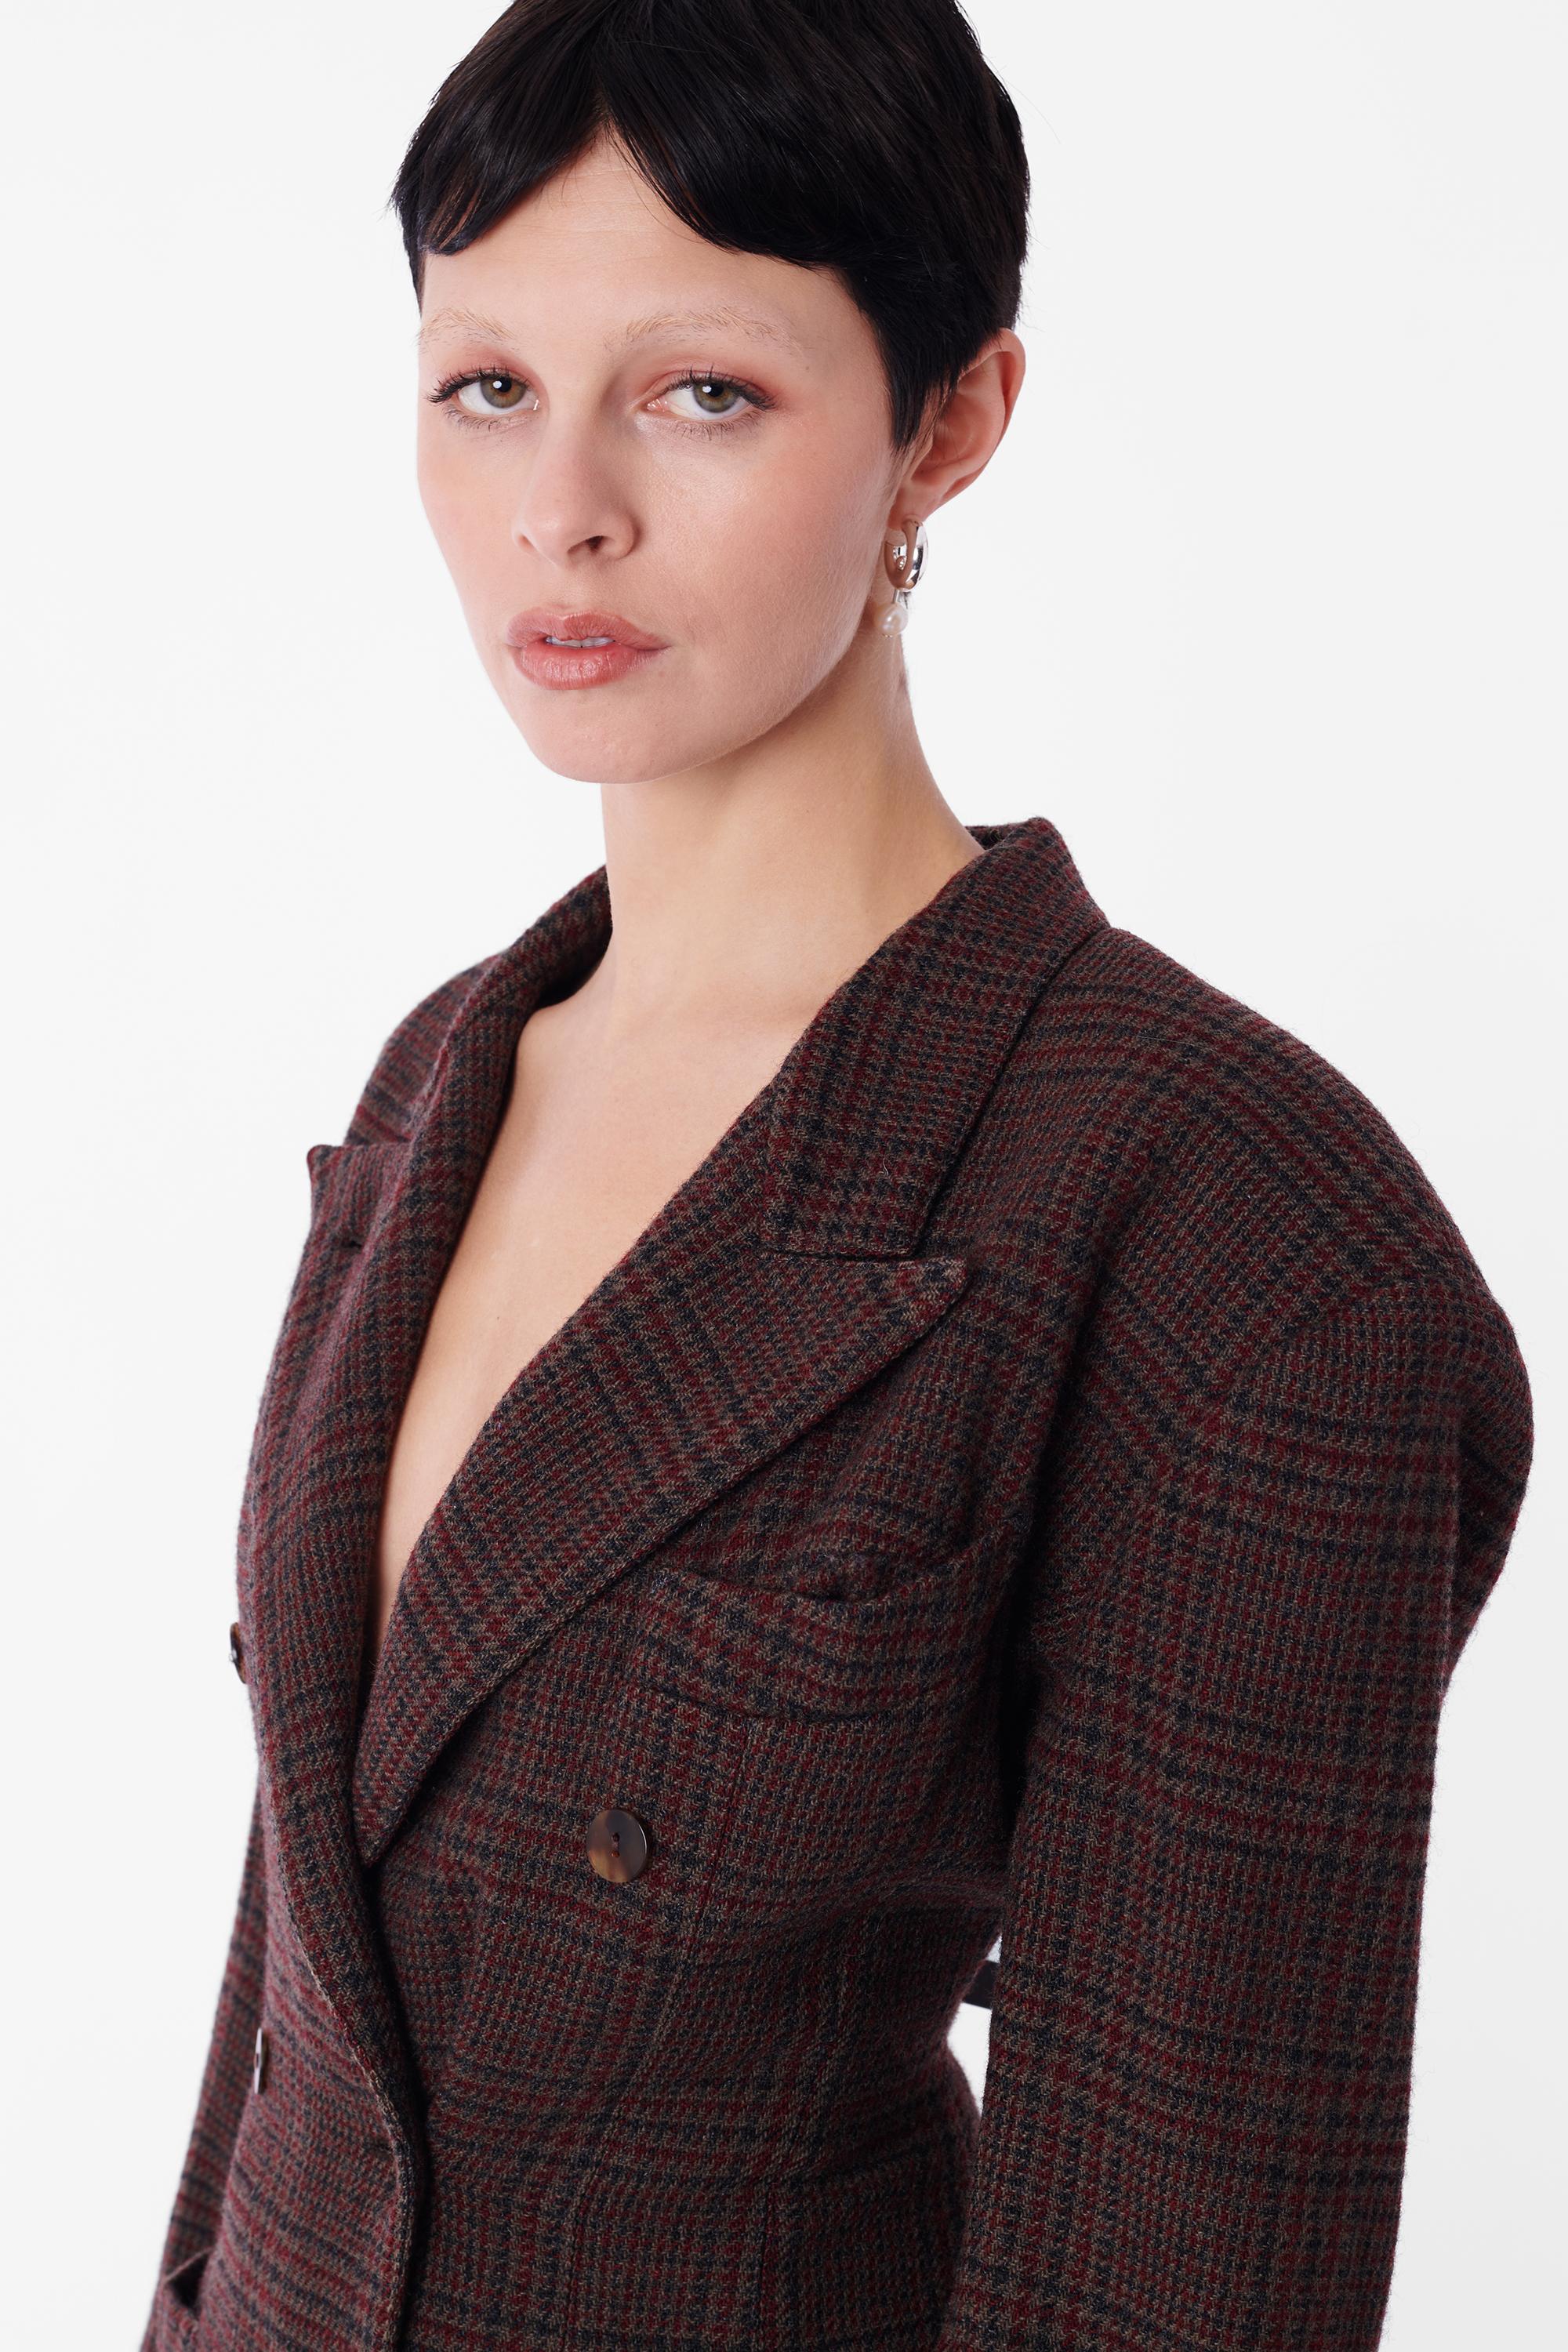 Vintage Jean Paul Gaultier wool blazer. Features double breasted silhouette, front left chest pocket and two hip pockets in a wool tartan with full interior lining. In great vintage condition. Authenticity Guaranteed.

Size: UK 8
Color: Brown
Modern